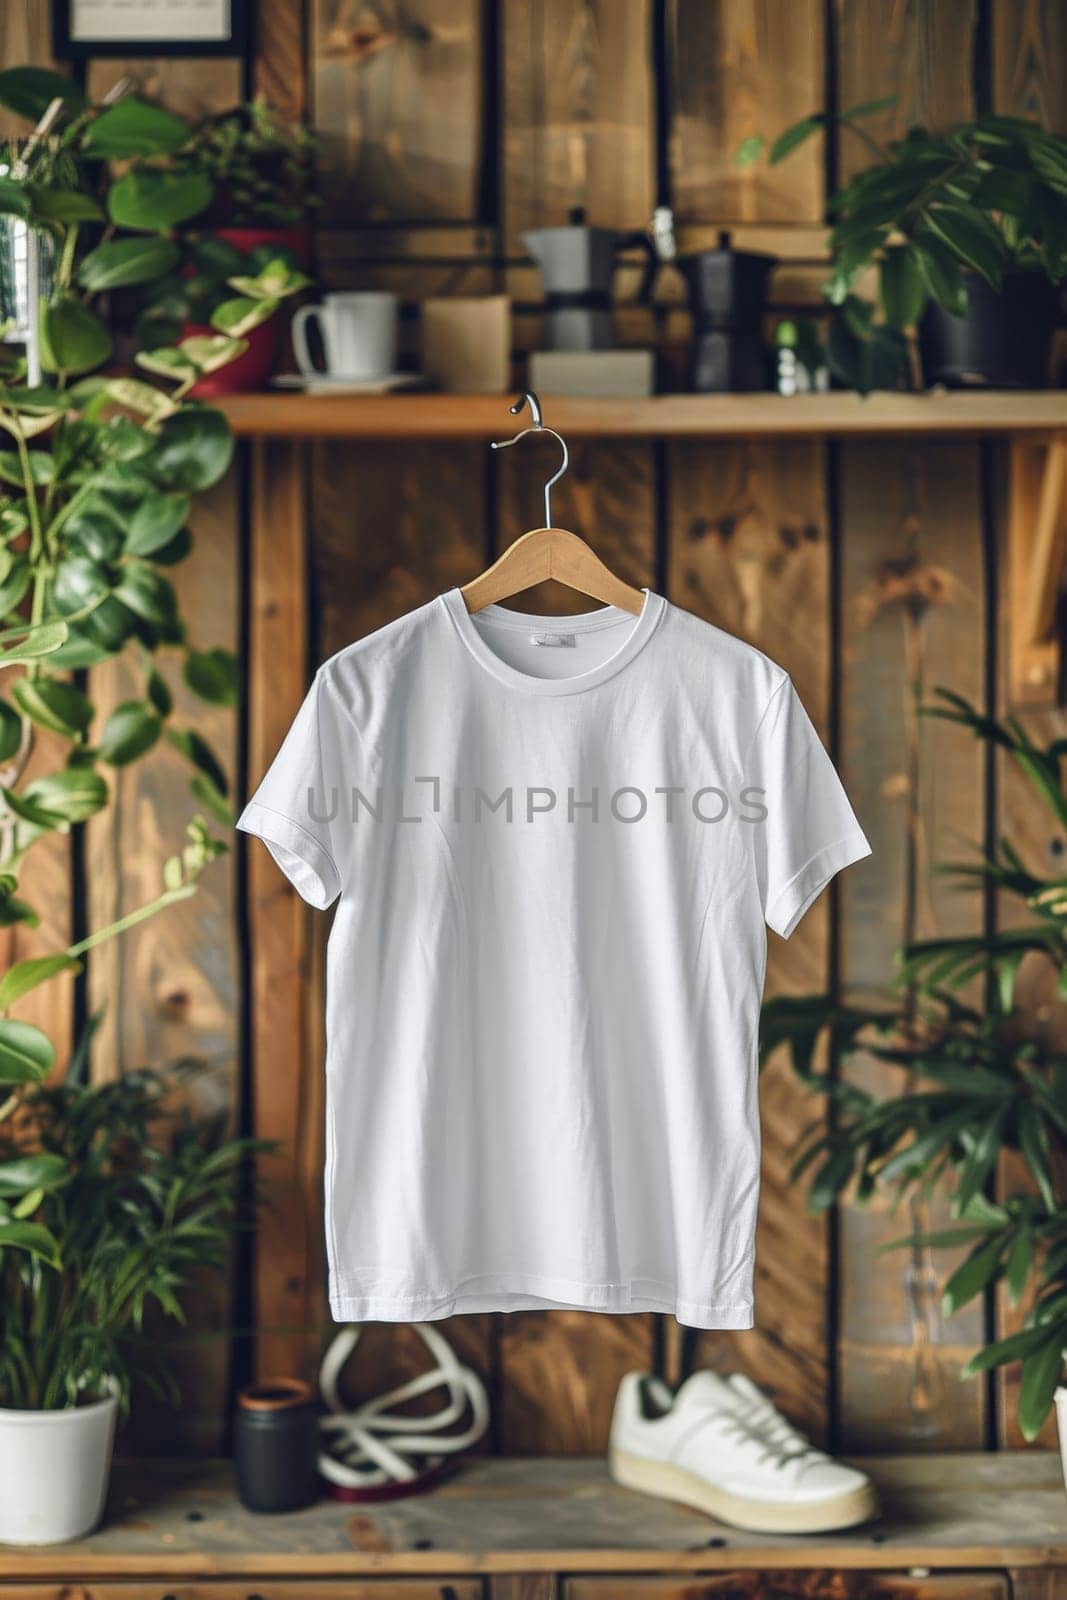 A white t-shirt is hanging on a hanger in front of a wooden shelf by itchaznong